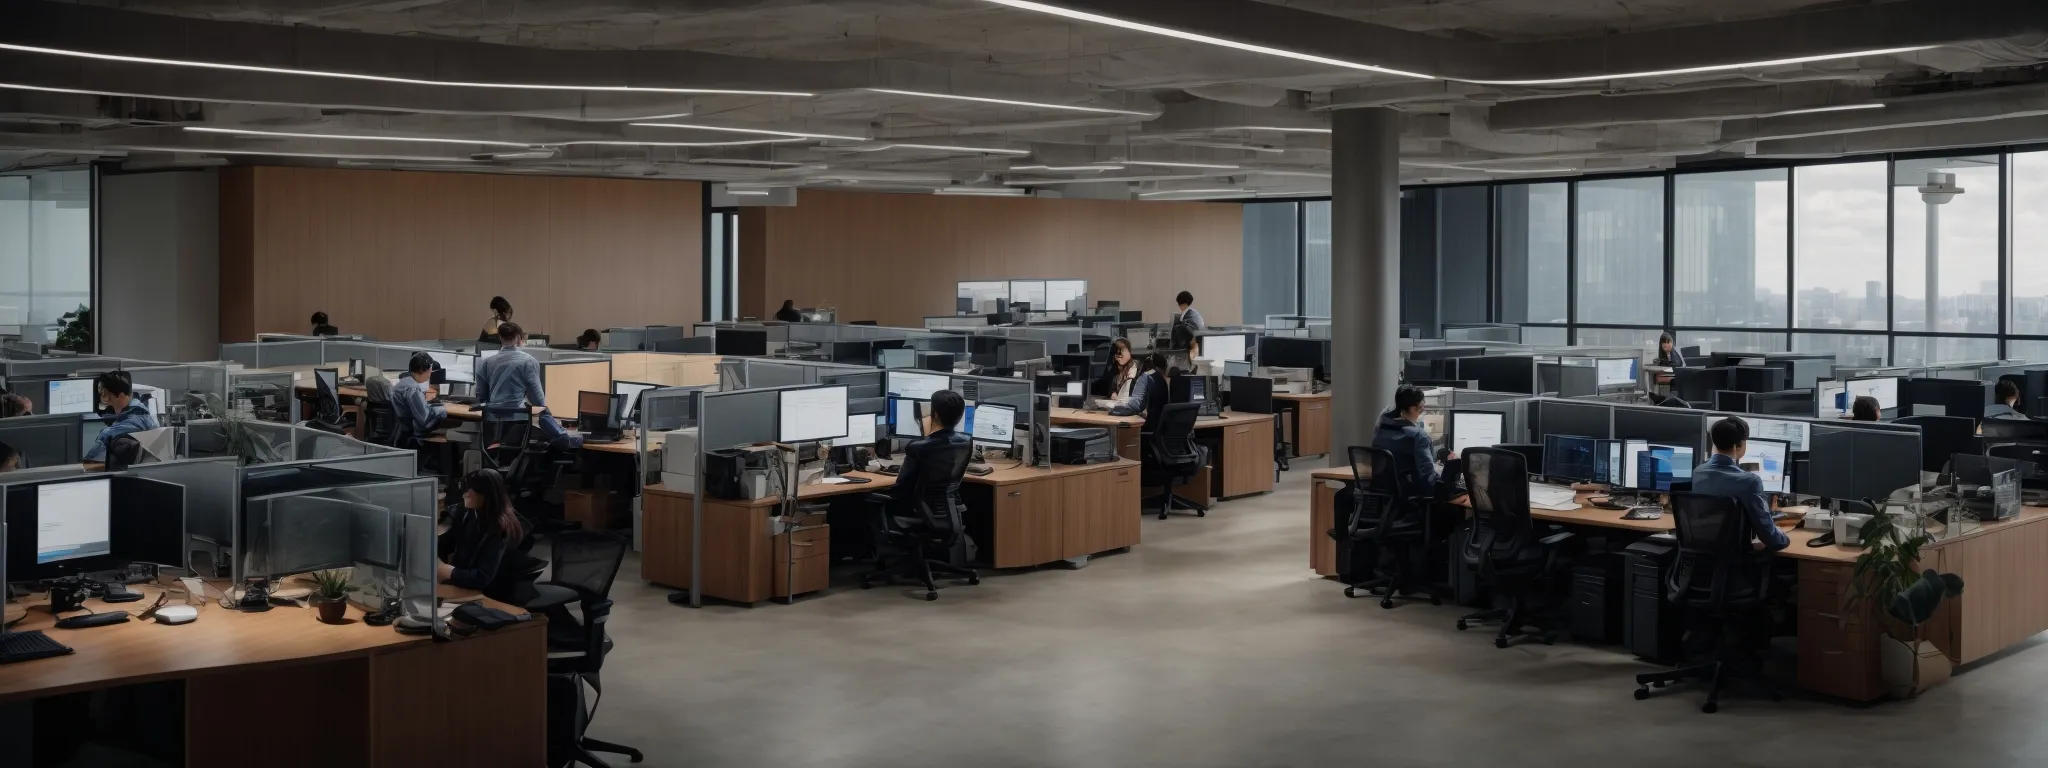 a panoramic view of a modern office with employees working on computers, analyzing data on large monitors.